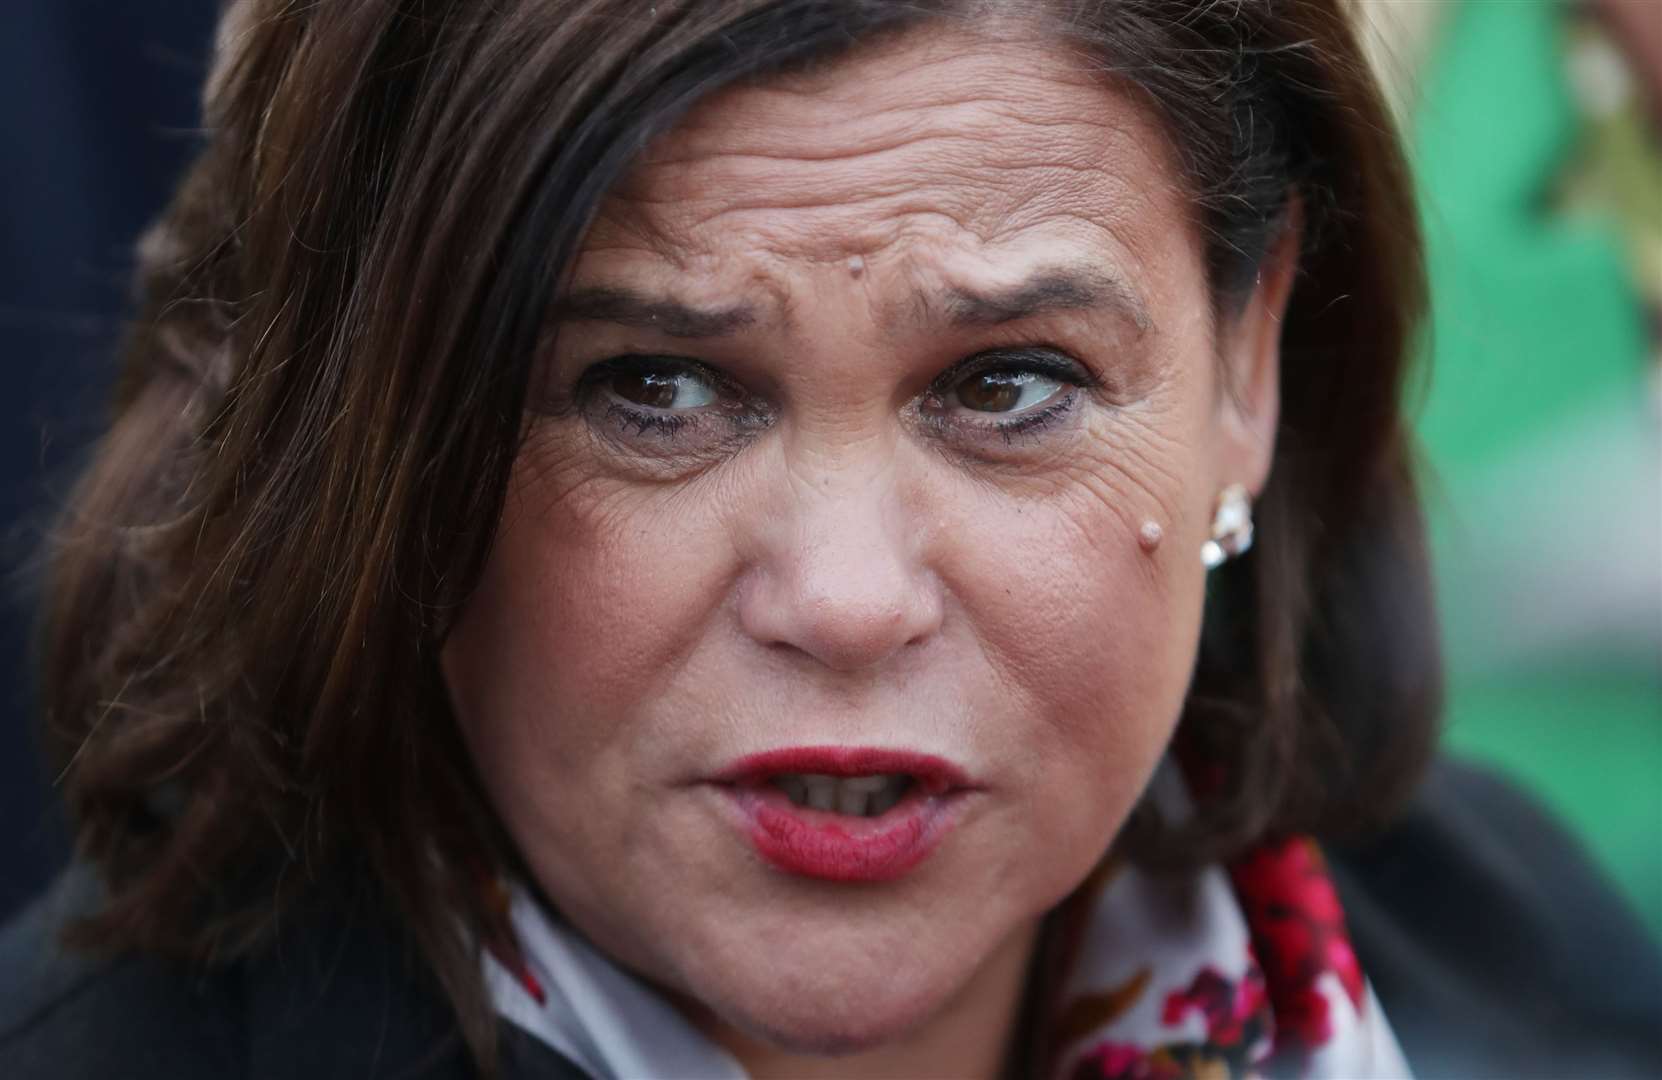 Sinn Fein president Mary Lou McDonald has said the current proposals could see the exclusion of thousands of victims from the nationalist community (Niall Carson/PA)